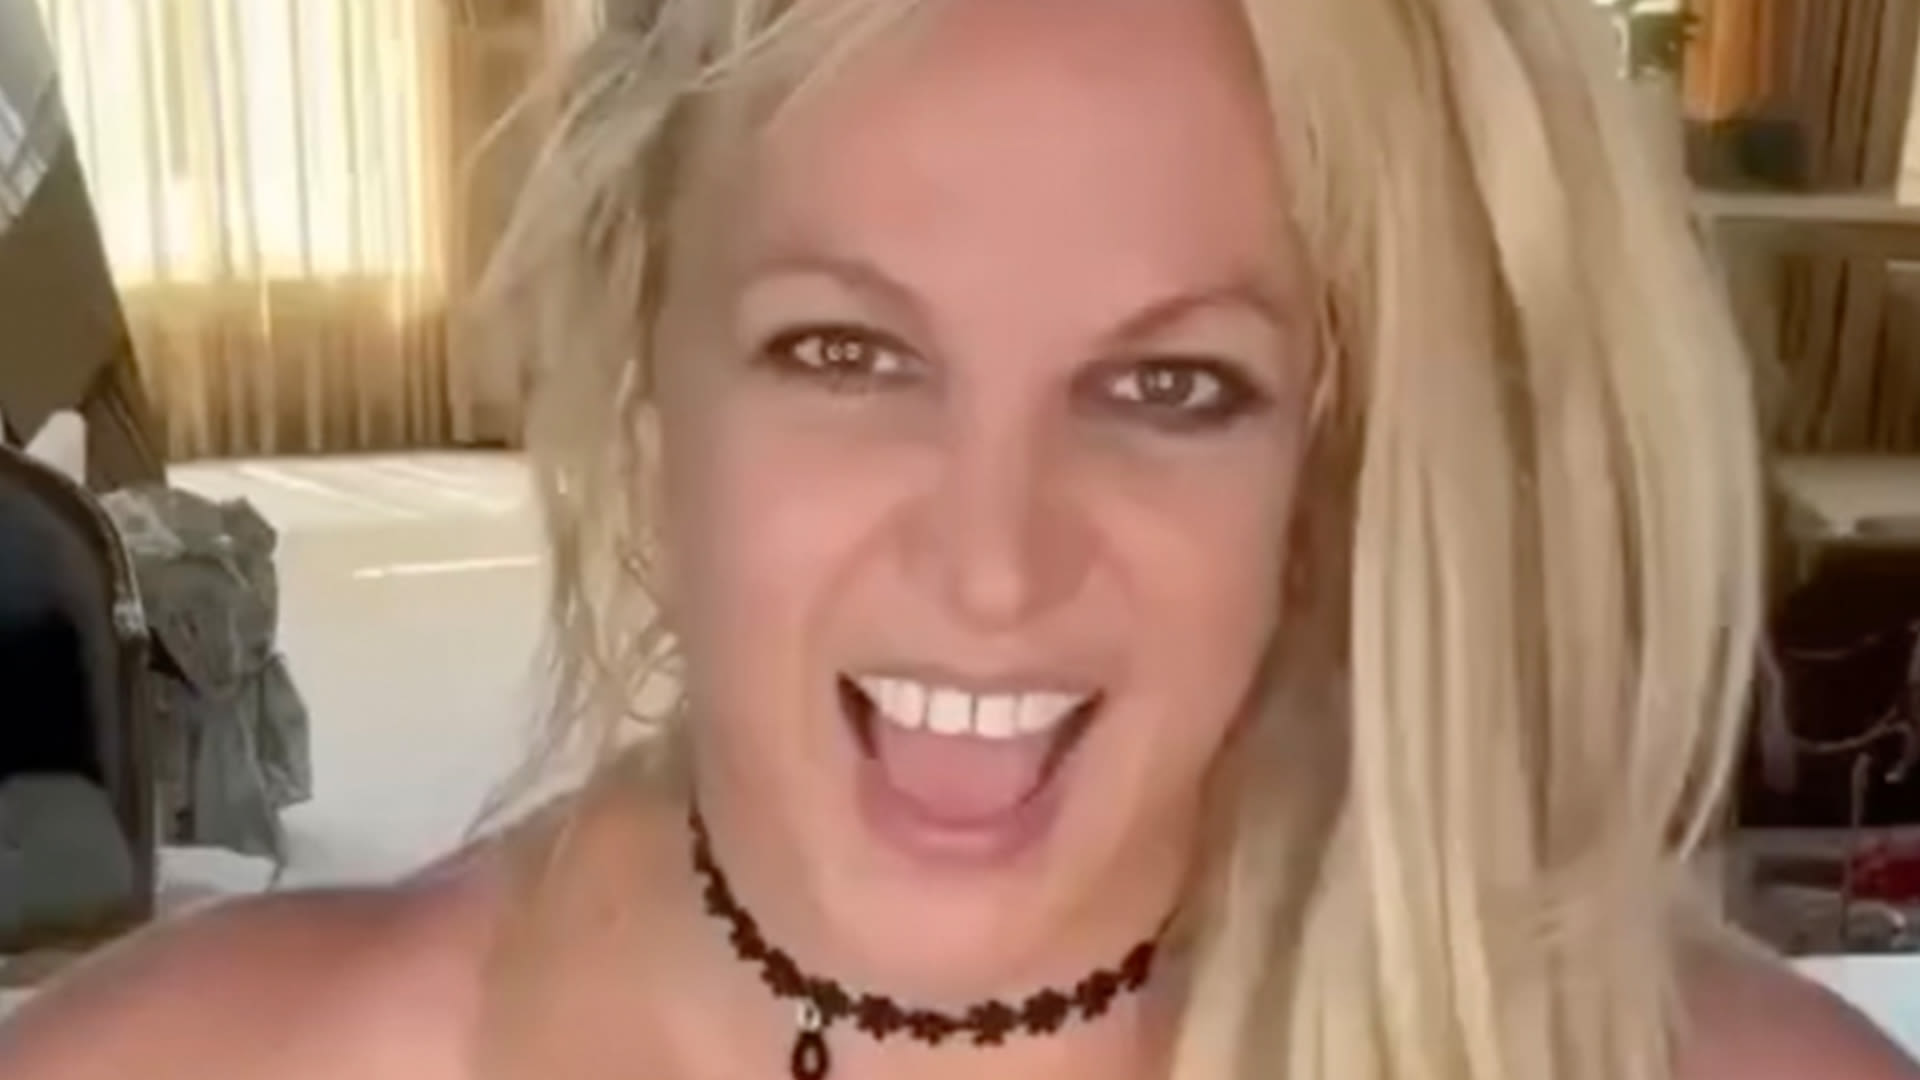 Britney Spears says it's 'good to be alive' as she rides horse in tiny bikini